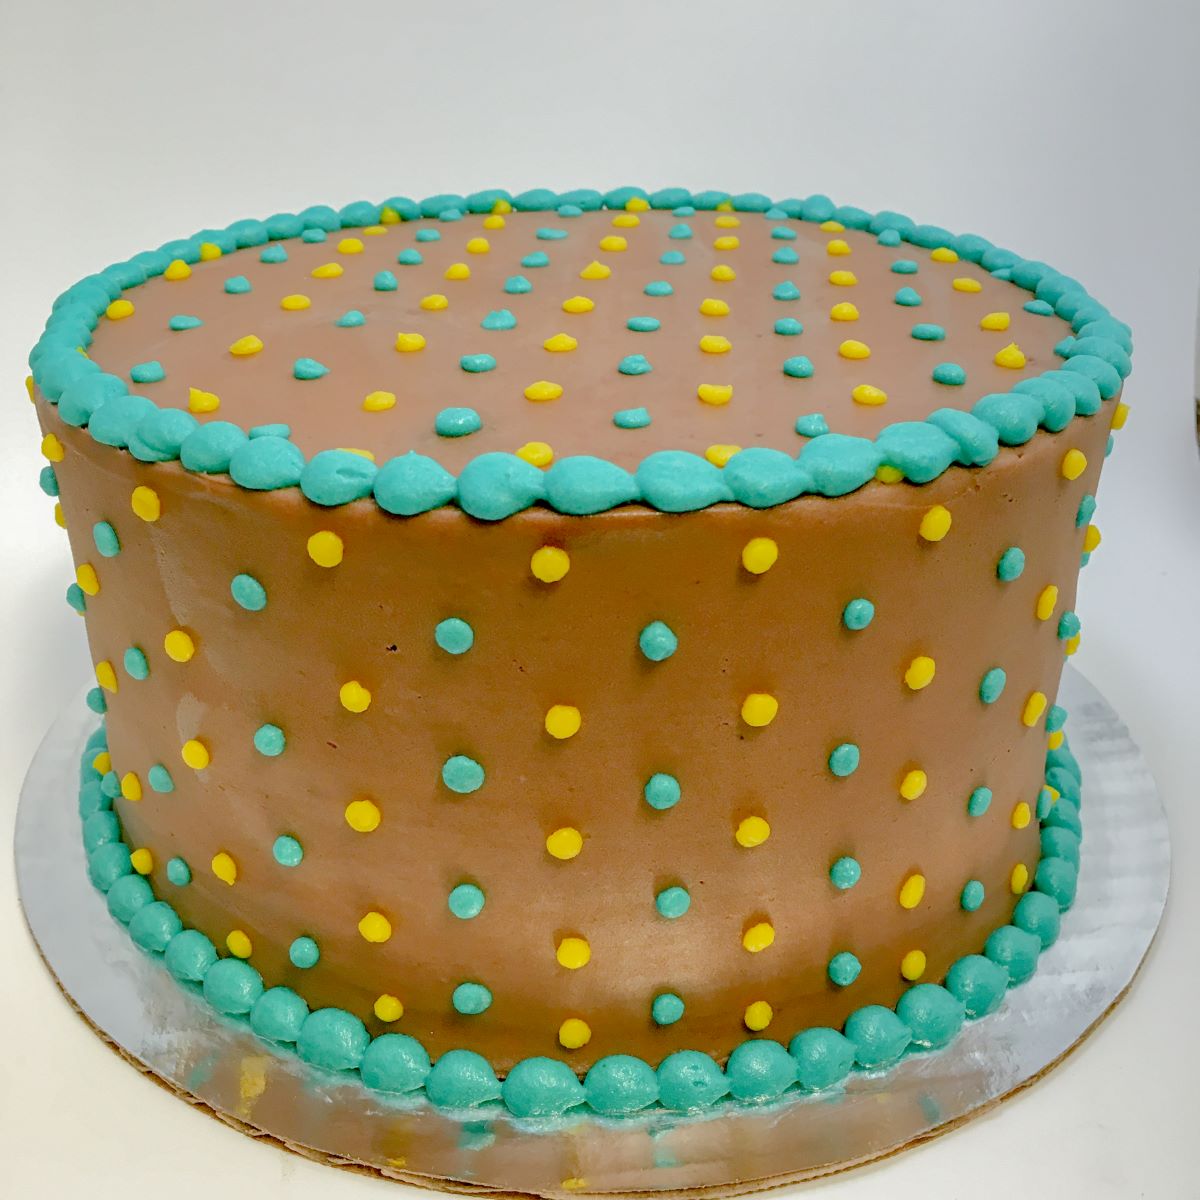 A chocolate buttercream minimalist cake with a simple yellow and teal dot design.